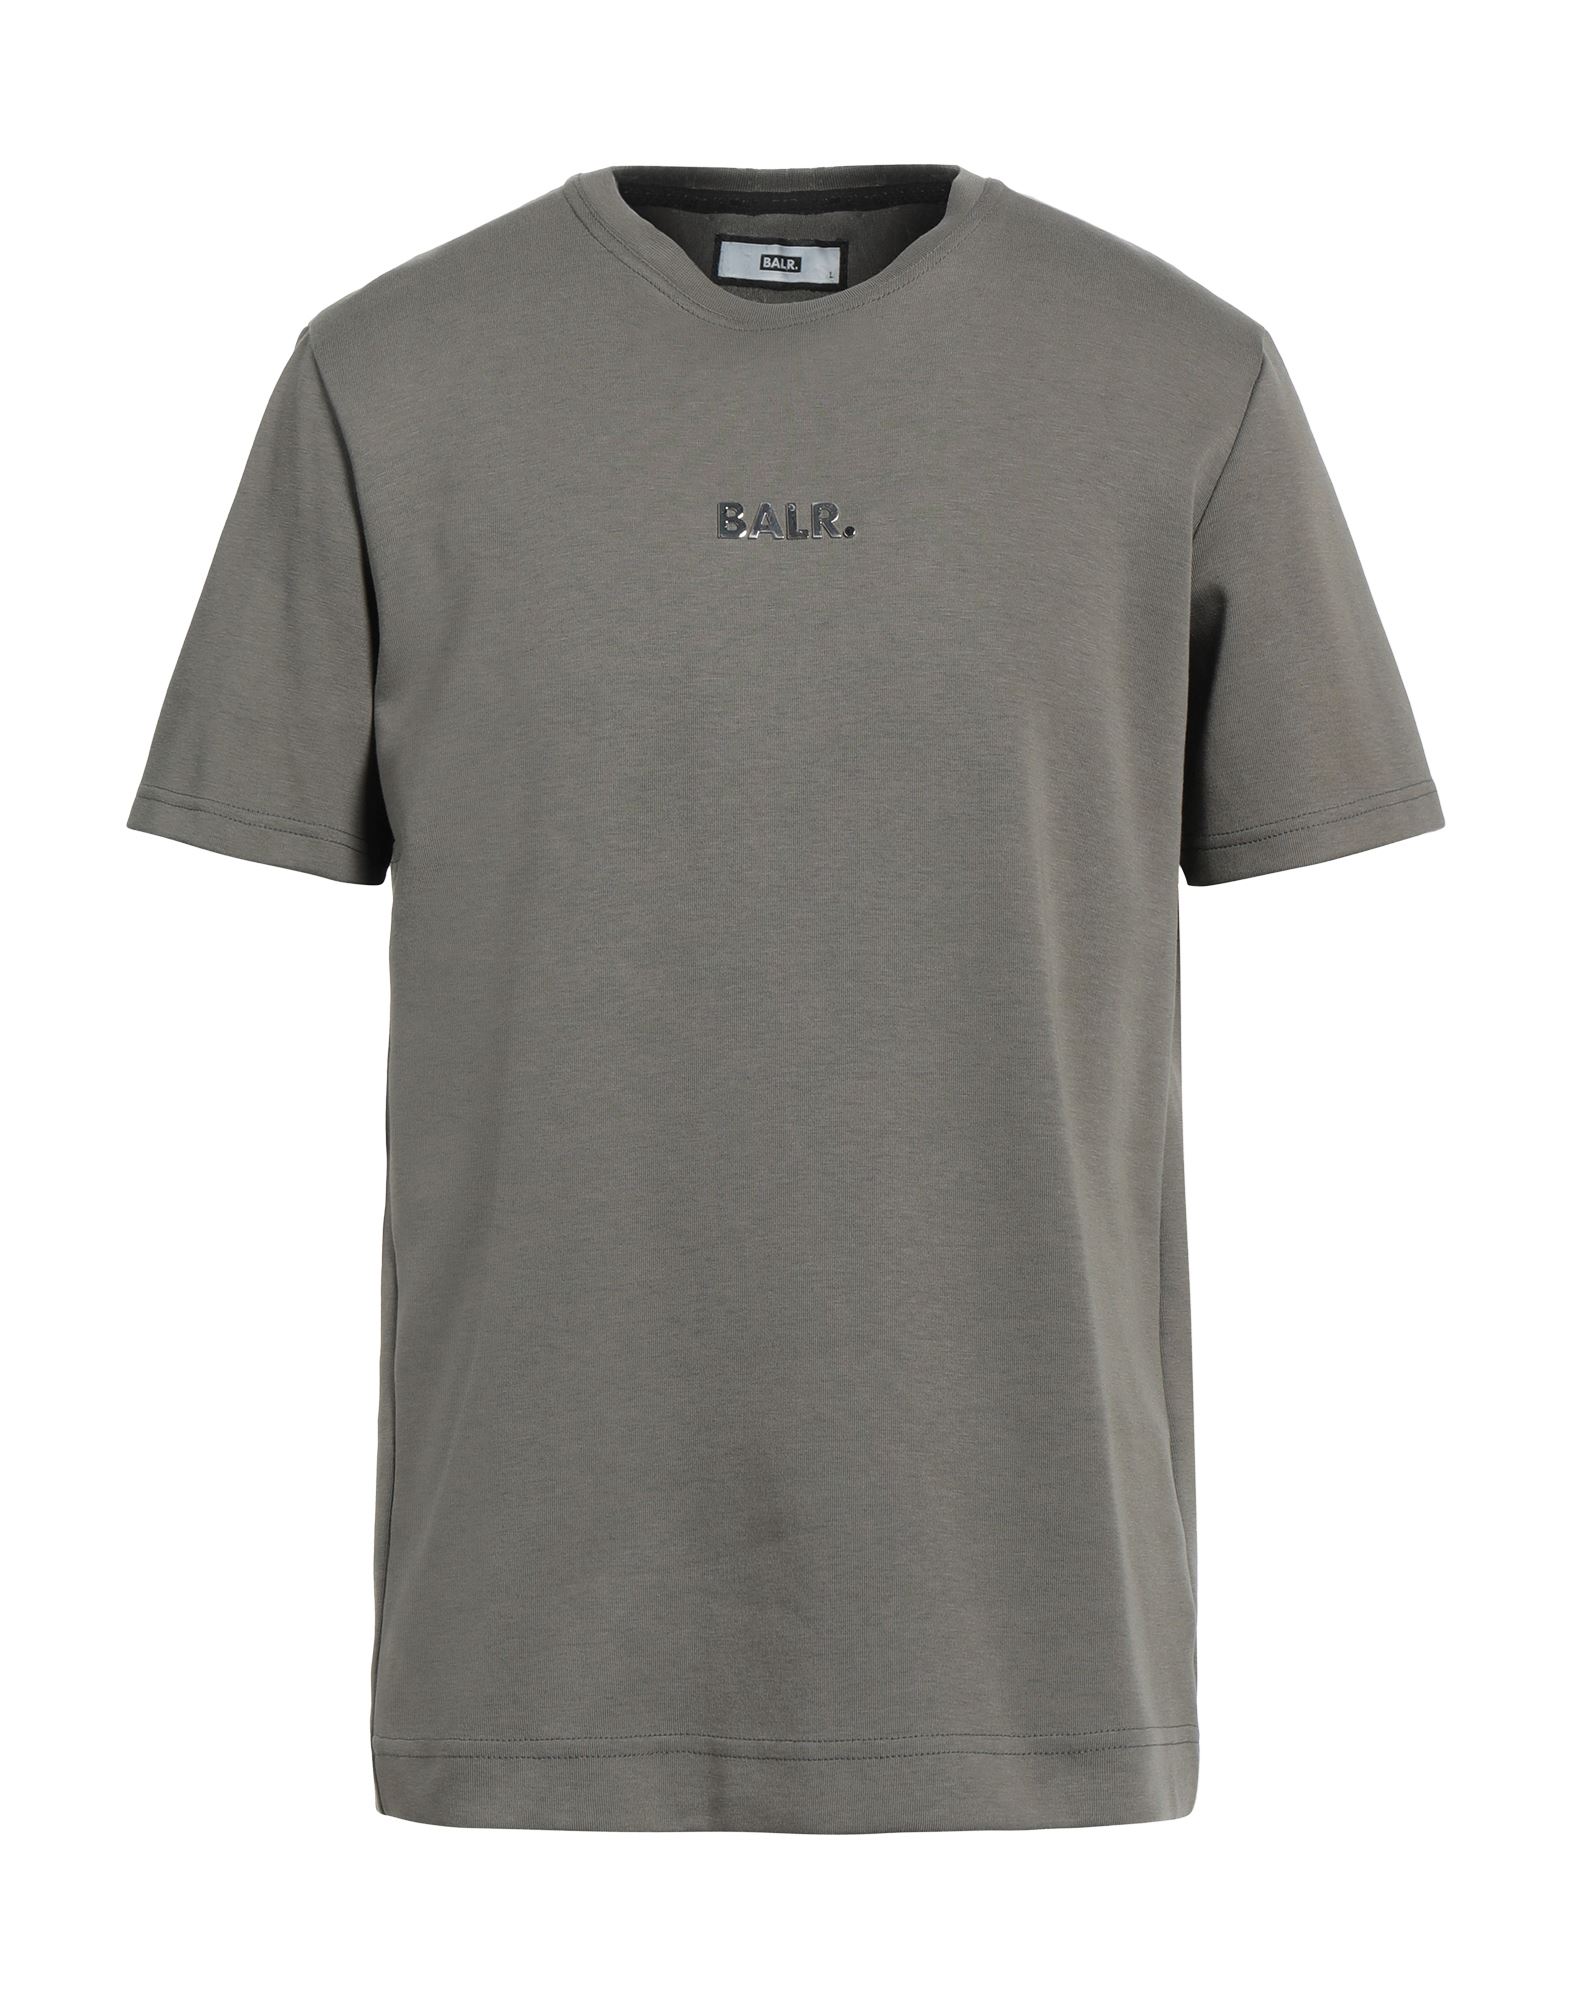 Balr. T-shirts In Military Green